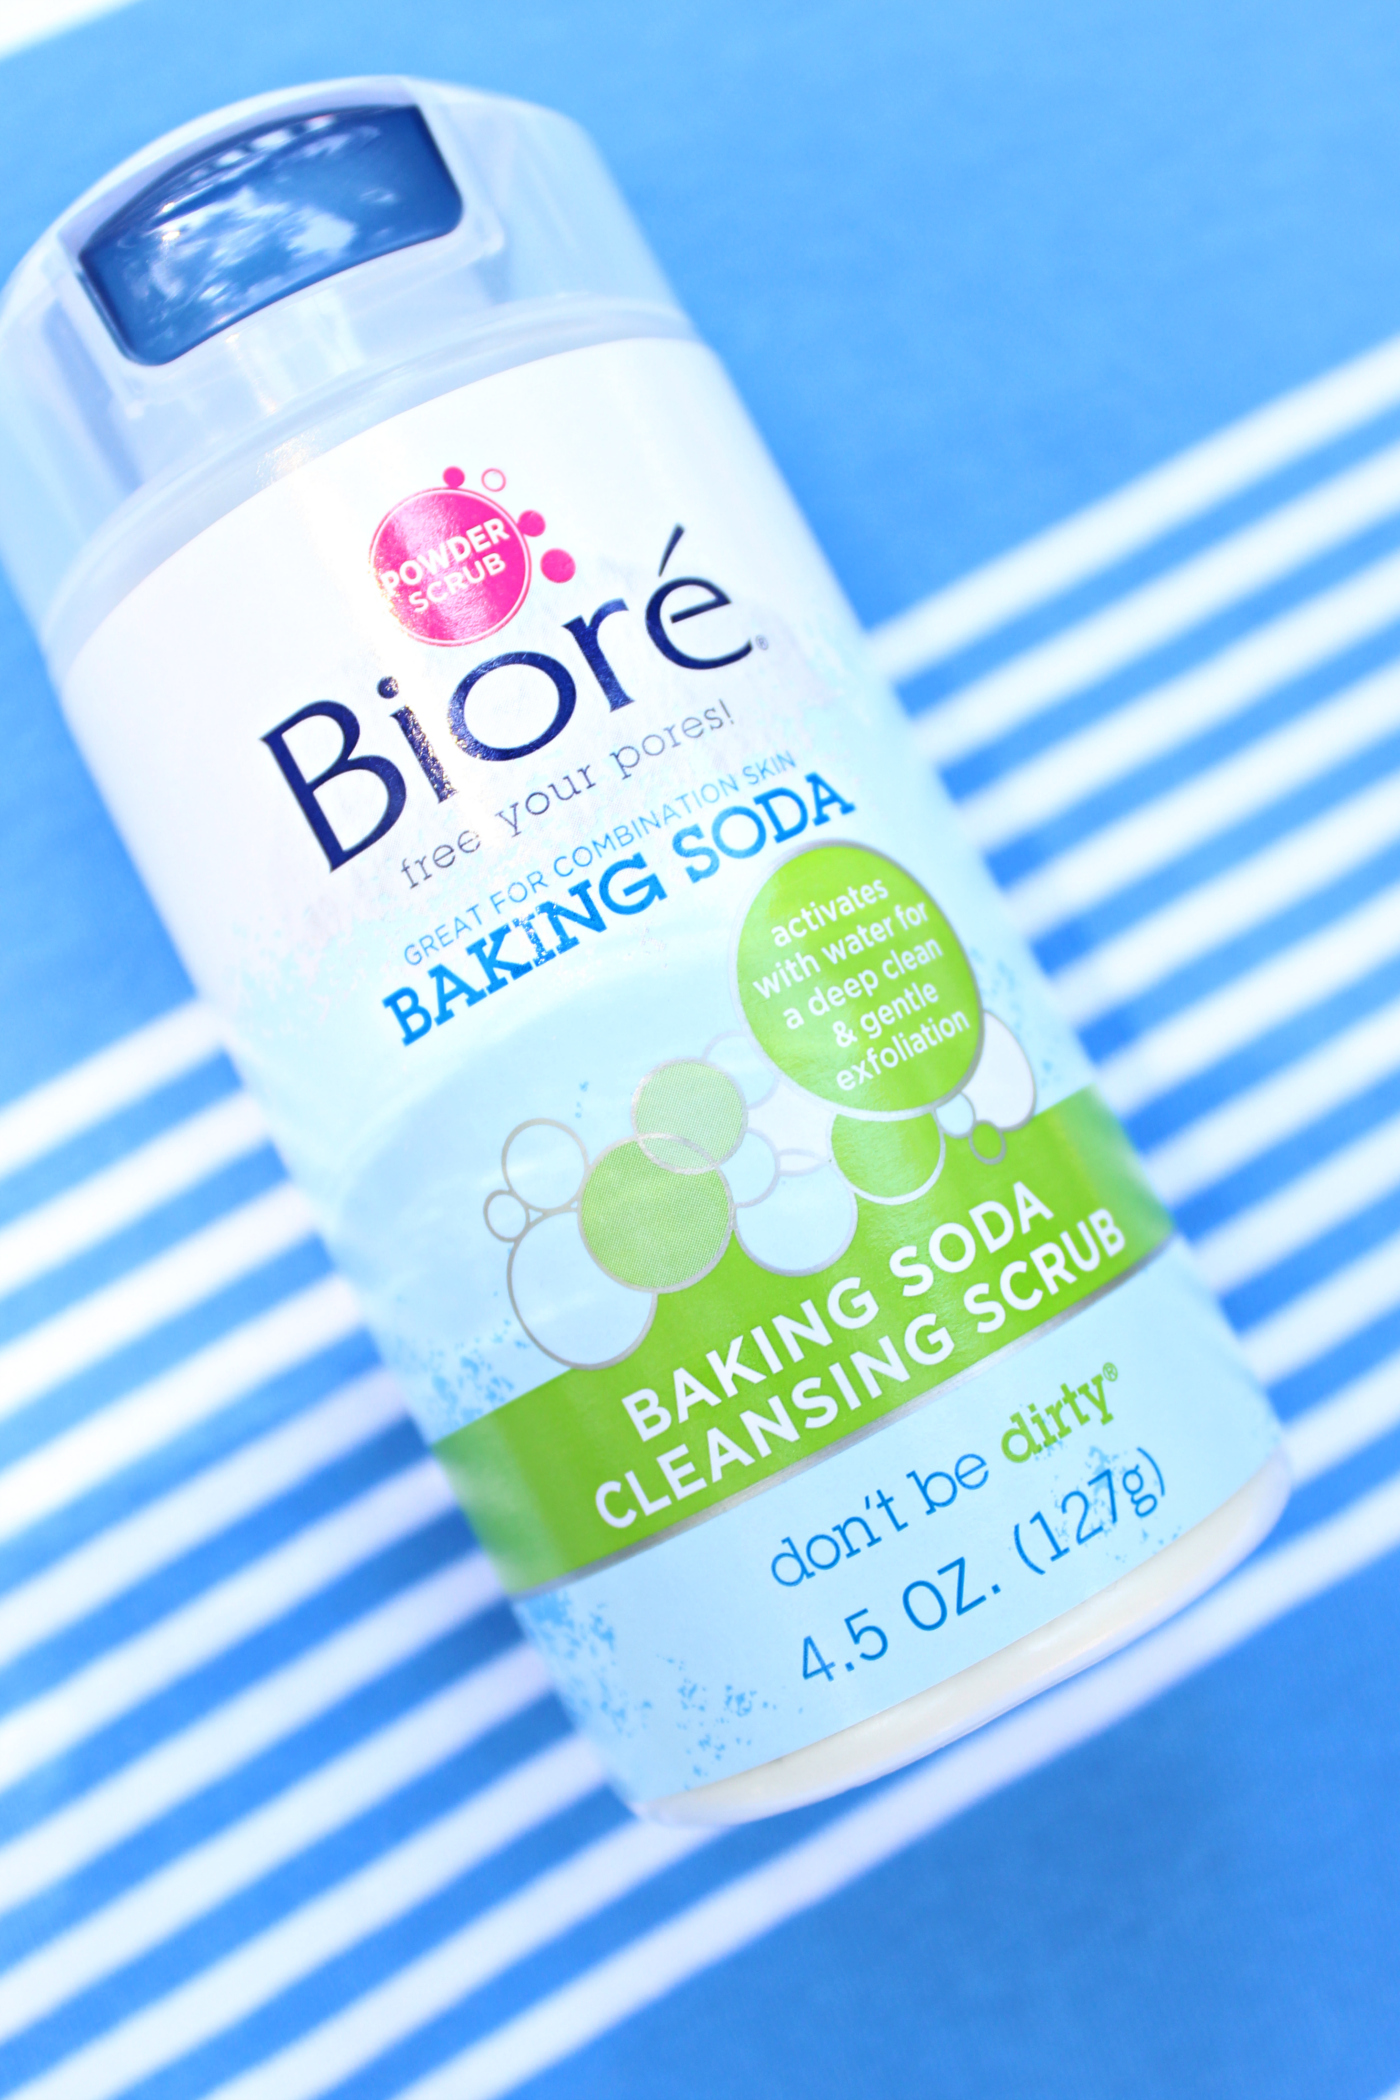 Update your fall skincare routine with a new baking soda cleansing scrub from Bioré